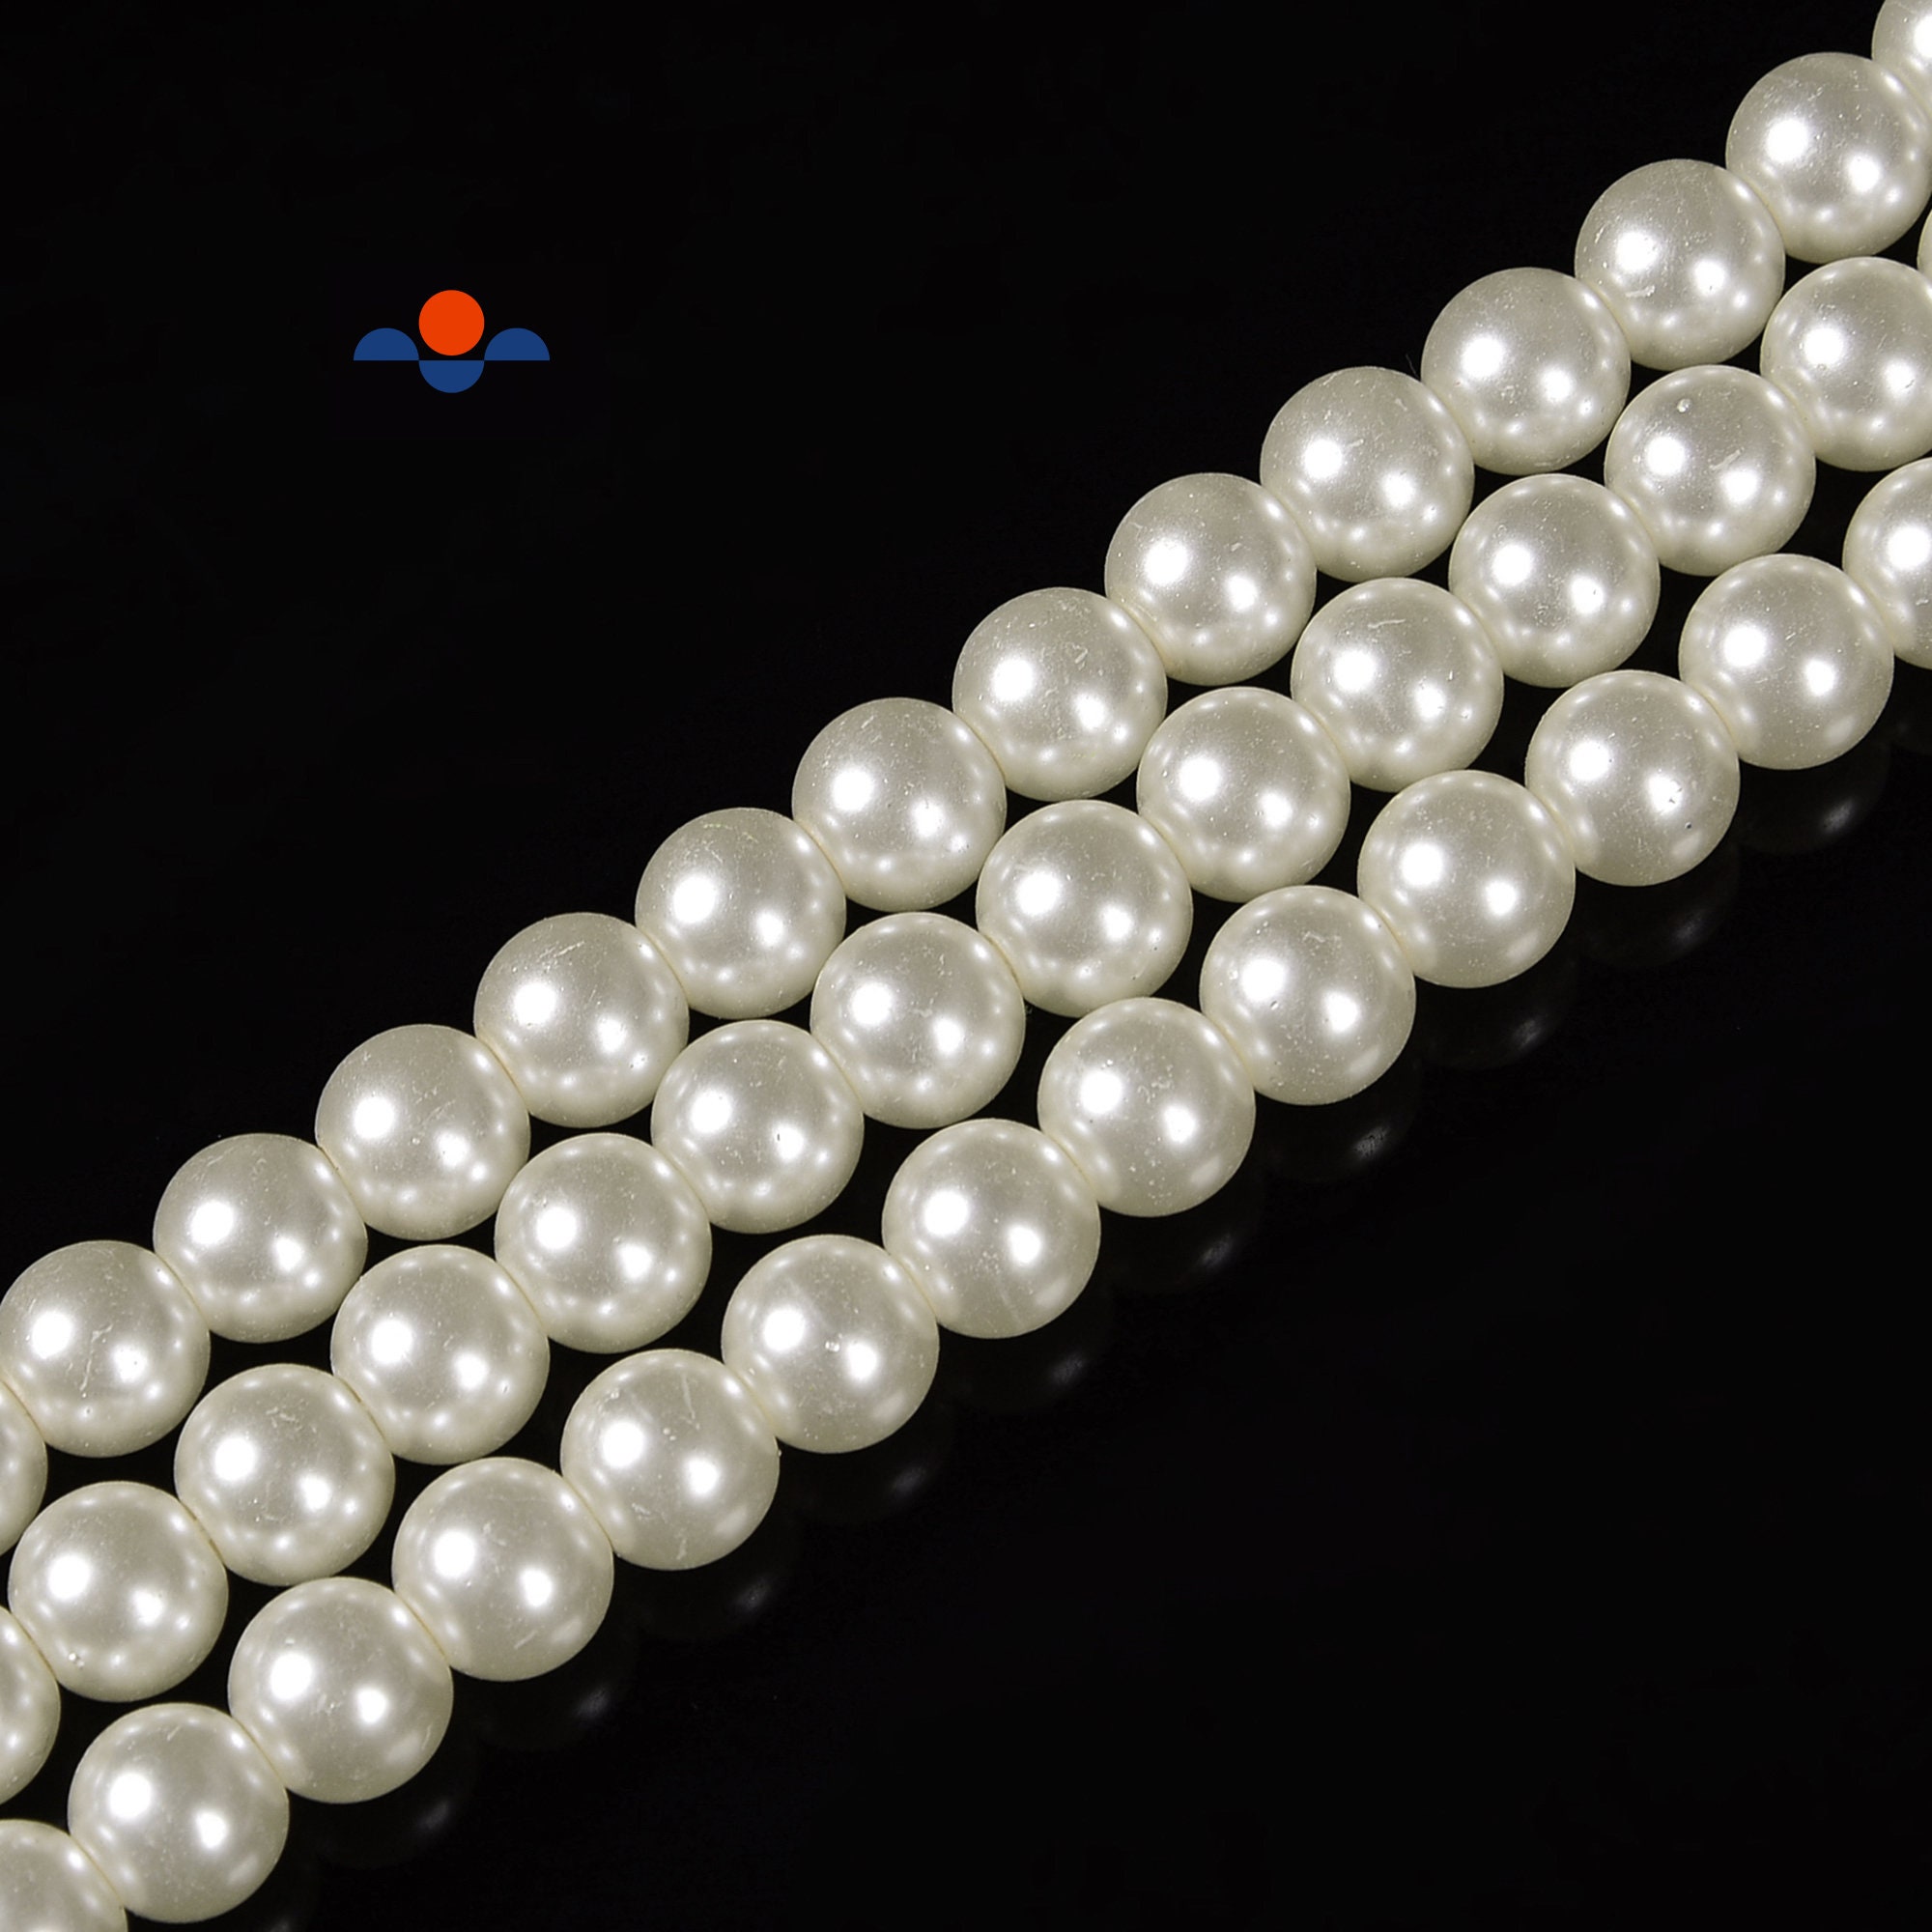 Ivory Half Pearls In 1mm And 3mm Mix – Smileys Glitter Store